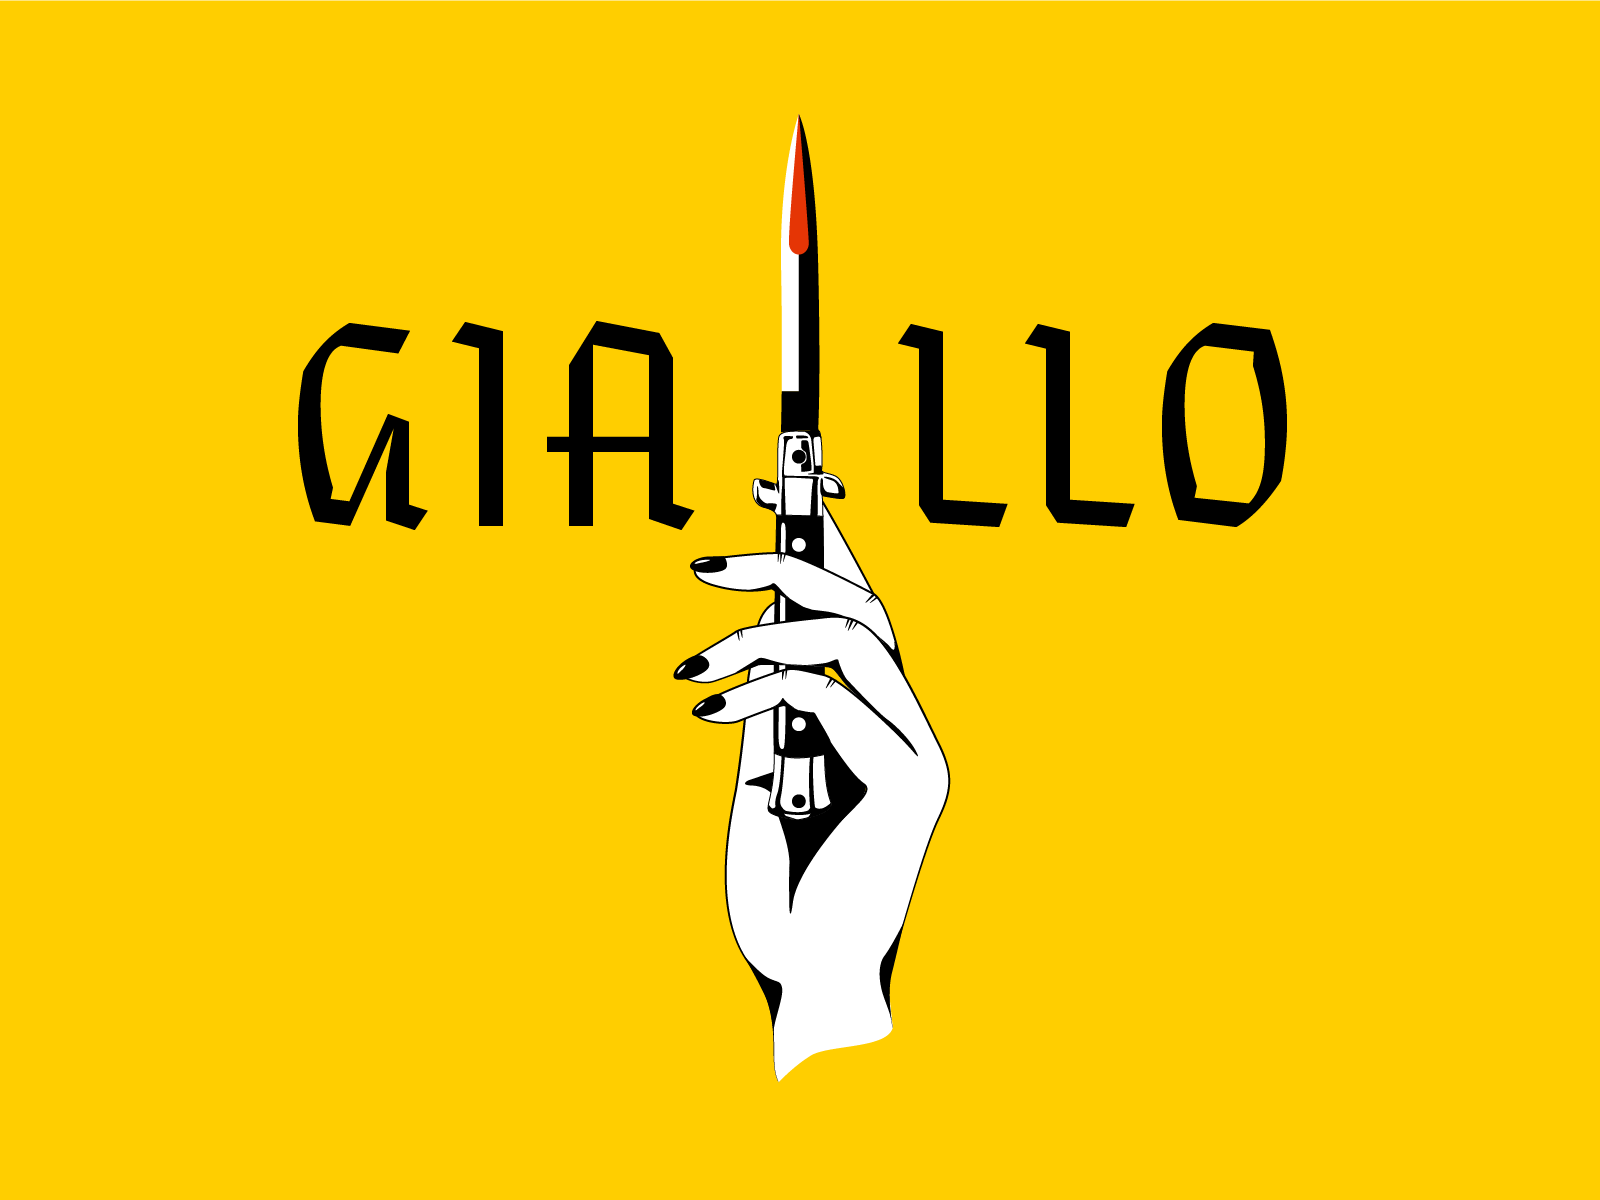 giallo by Courtney Lord on Dribbble